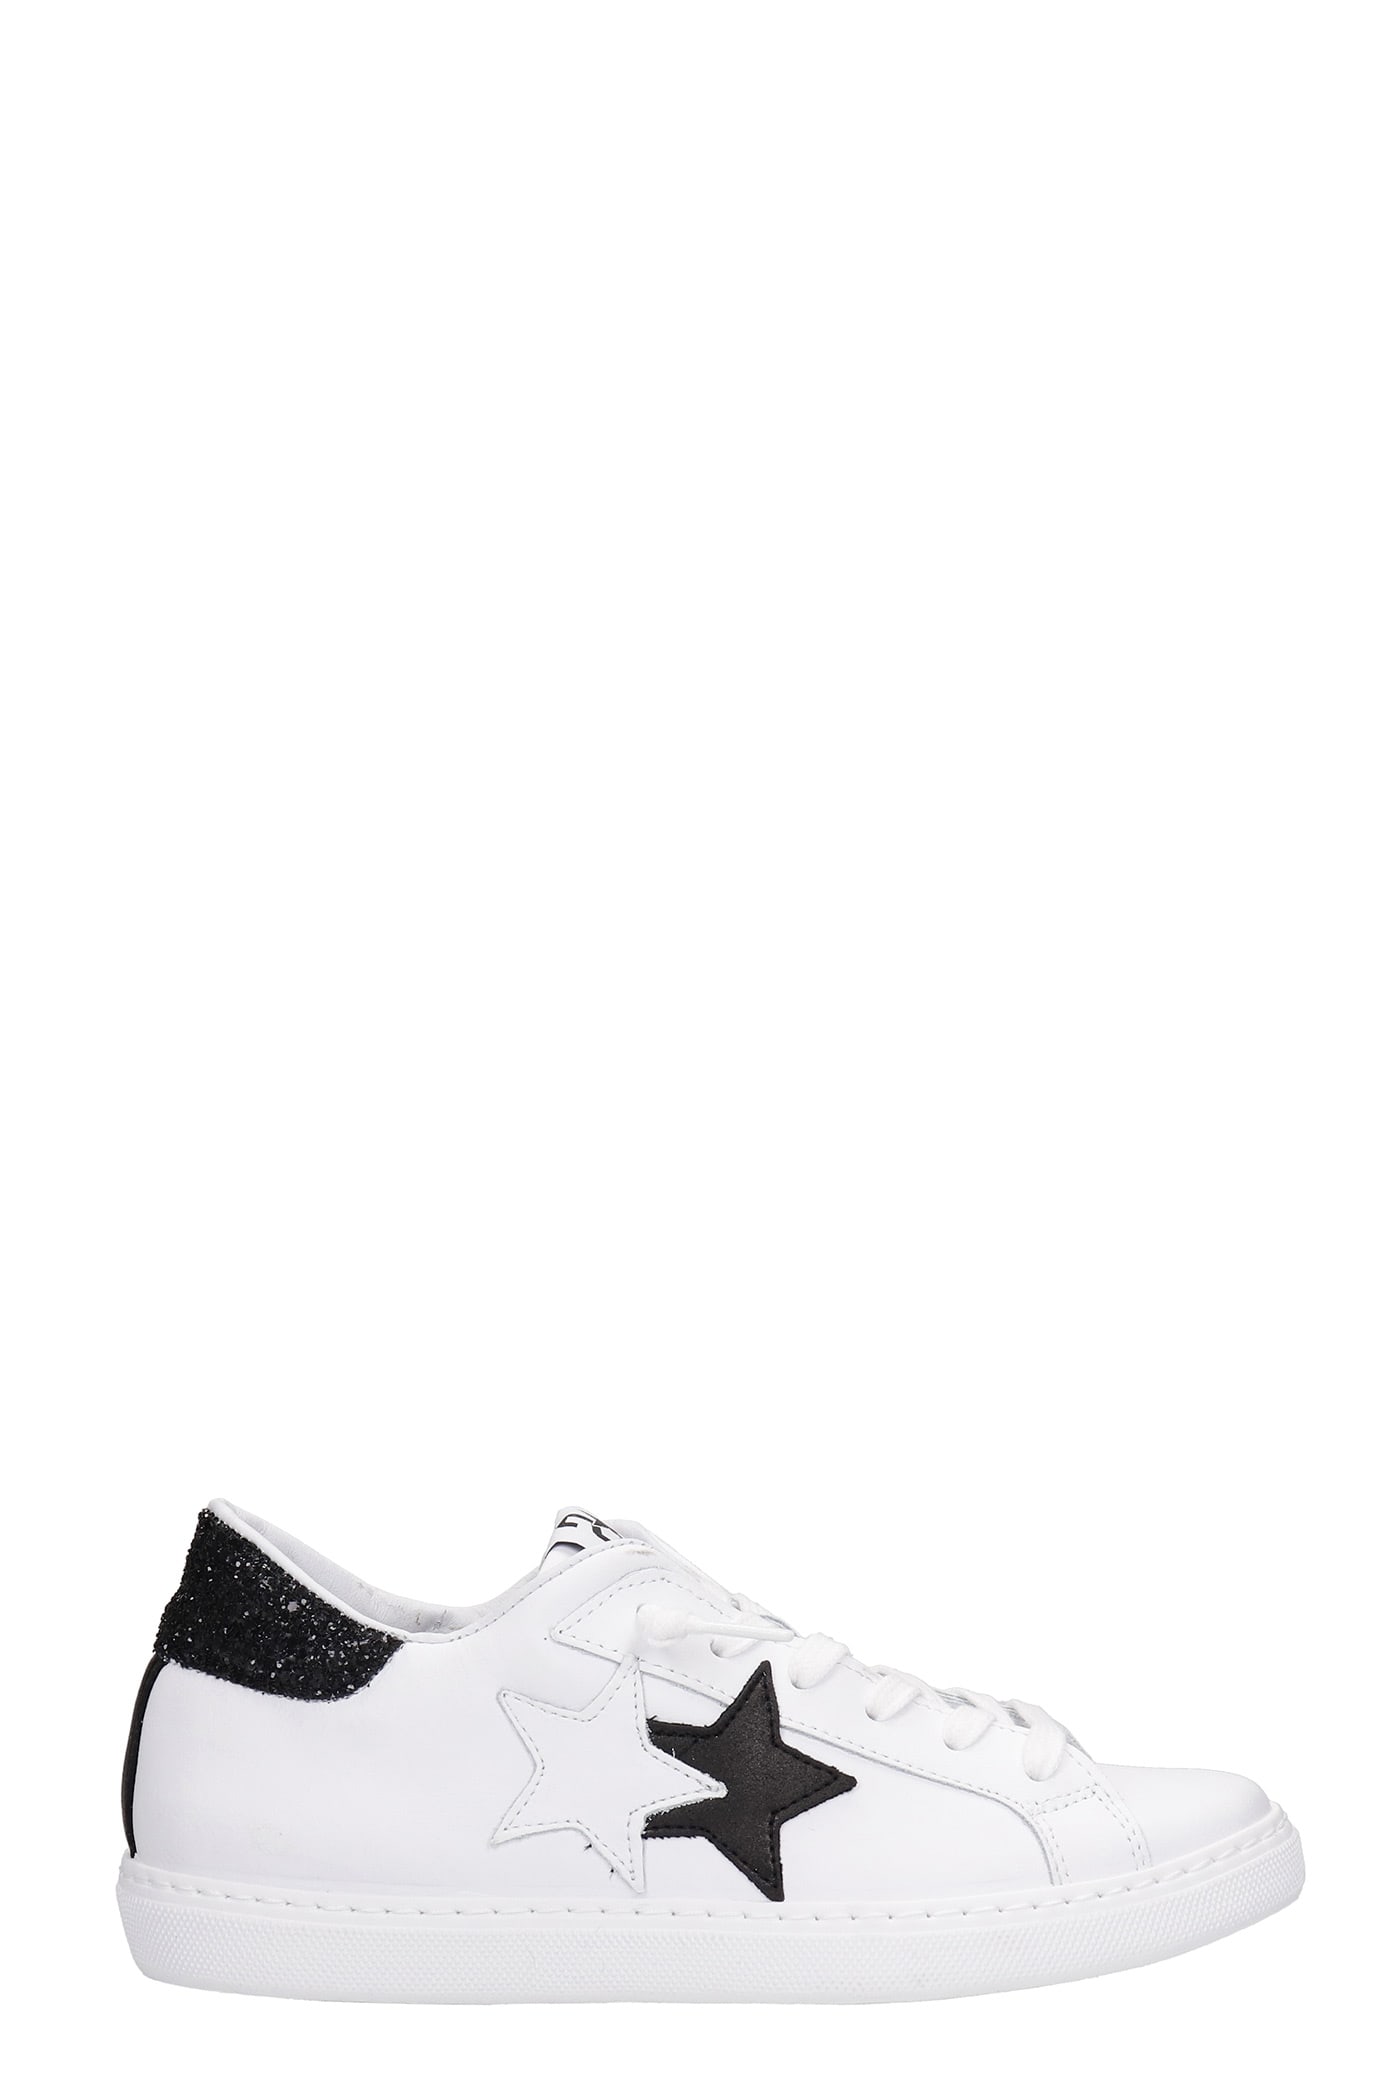 2STAR SNEAKERS IN WHITE LEATHER 2STAR